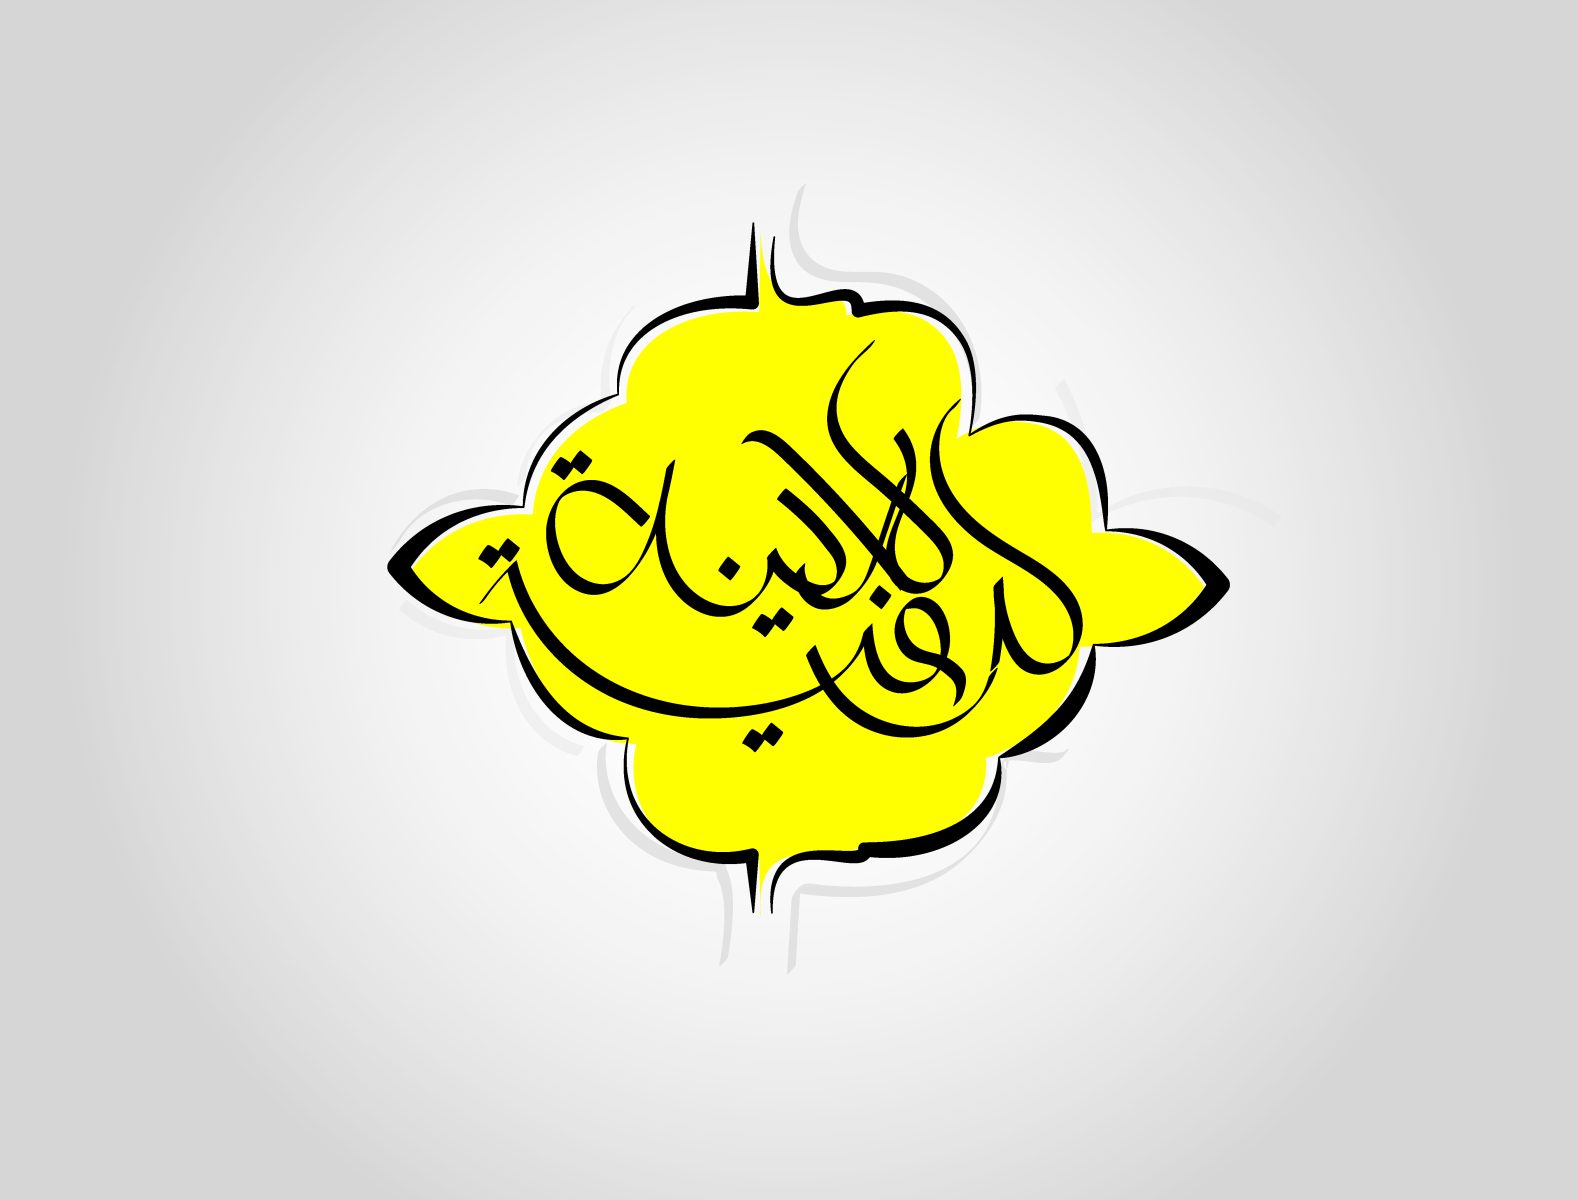 Madinah by Pouyesh on Dribbble